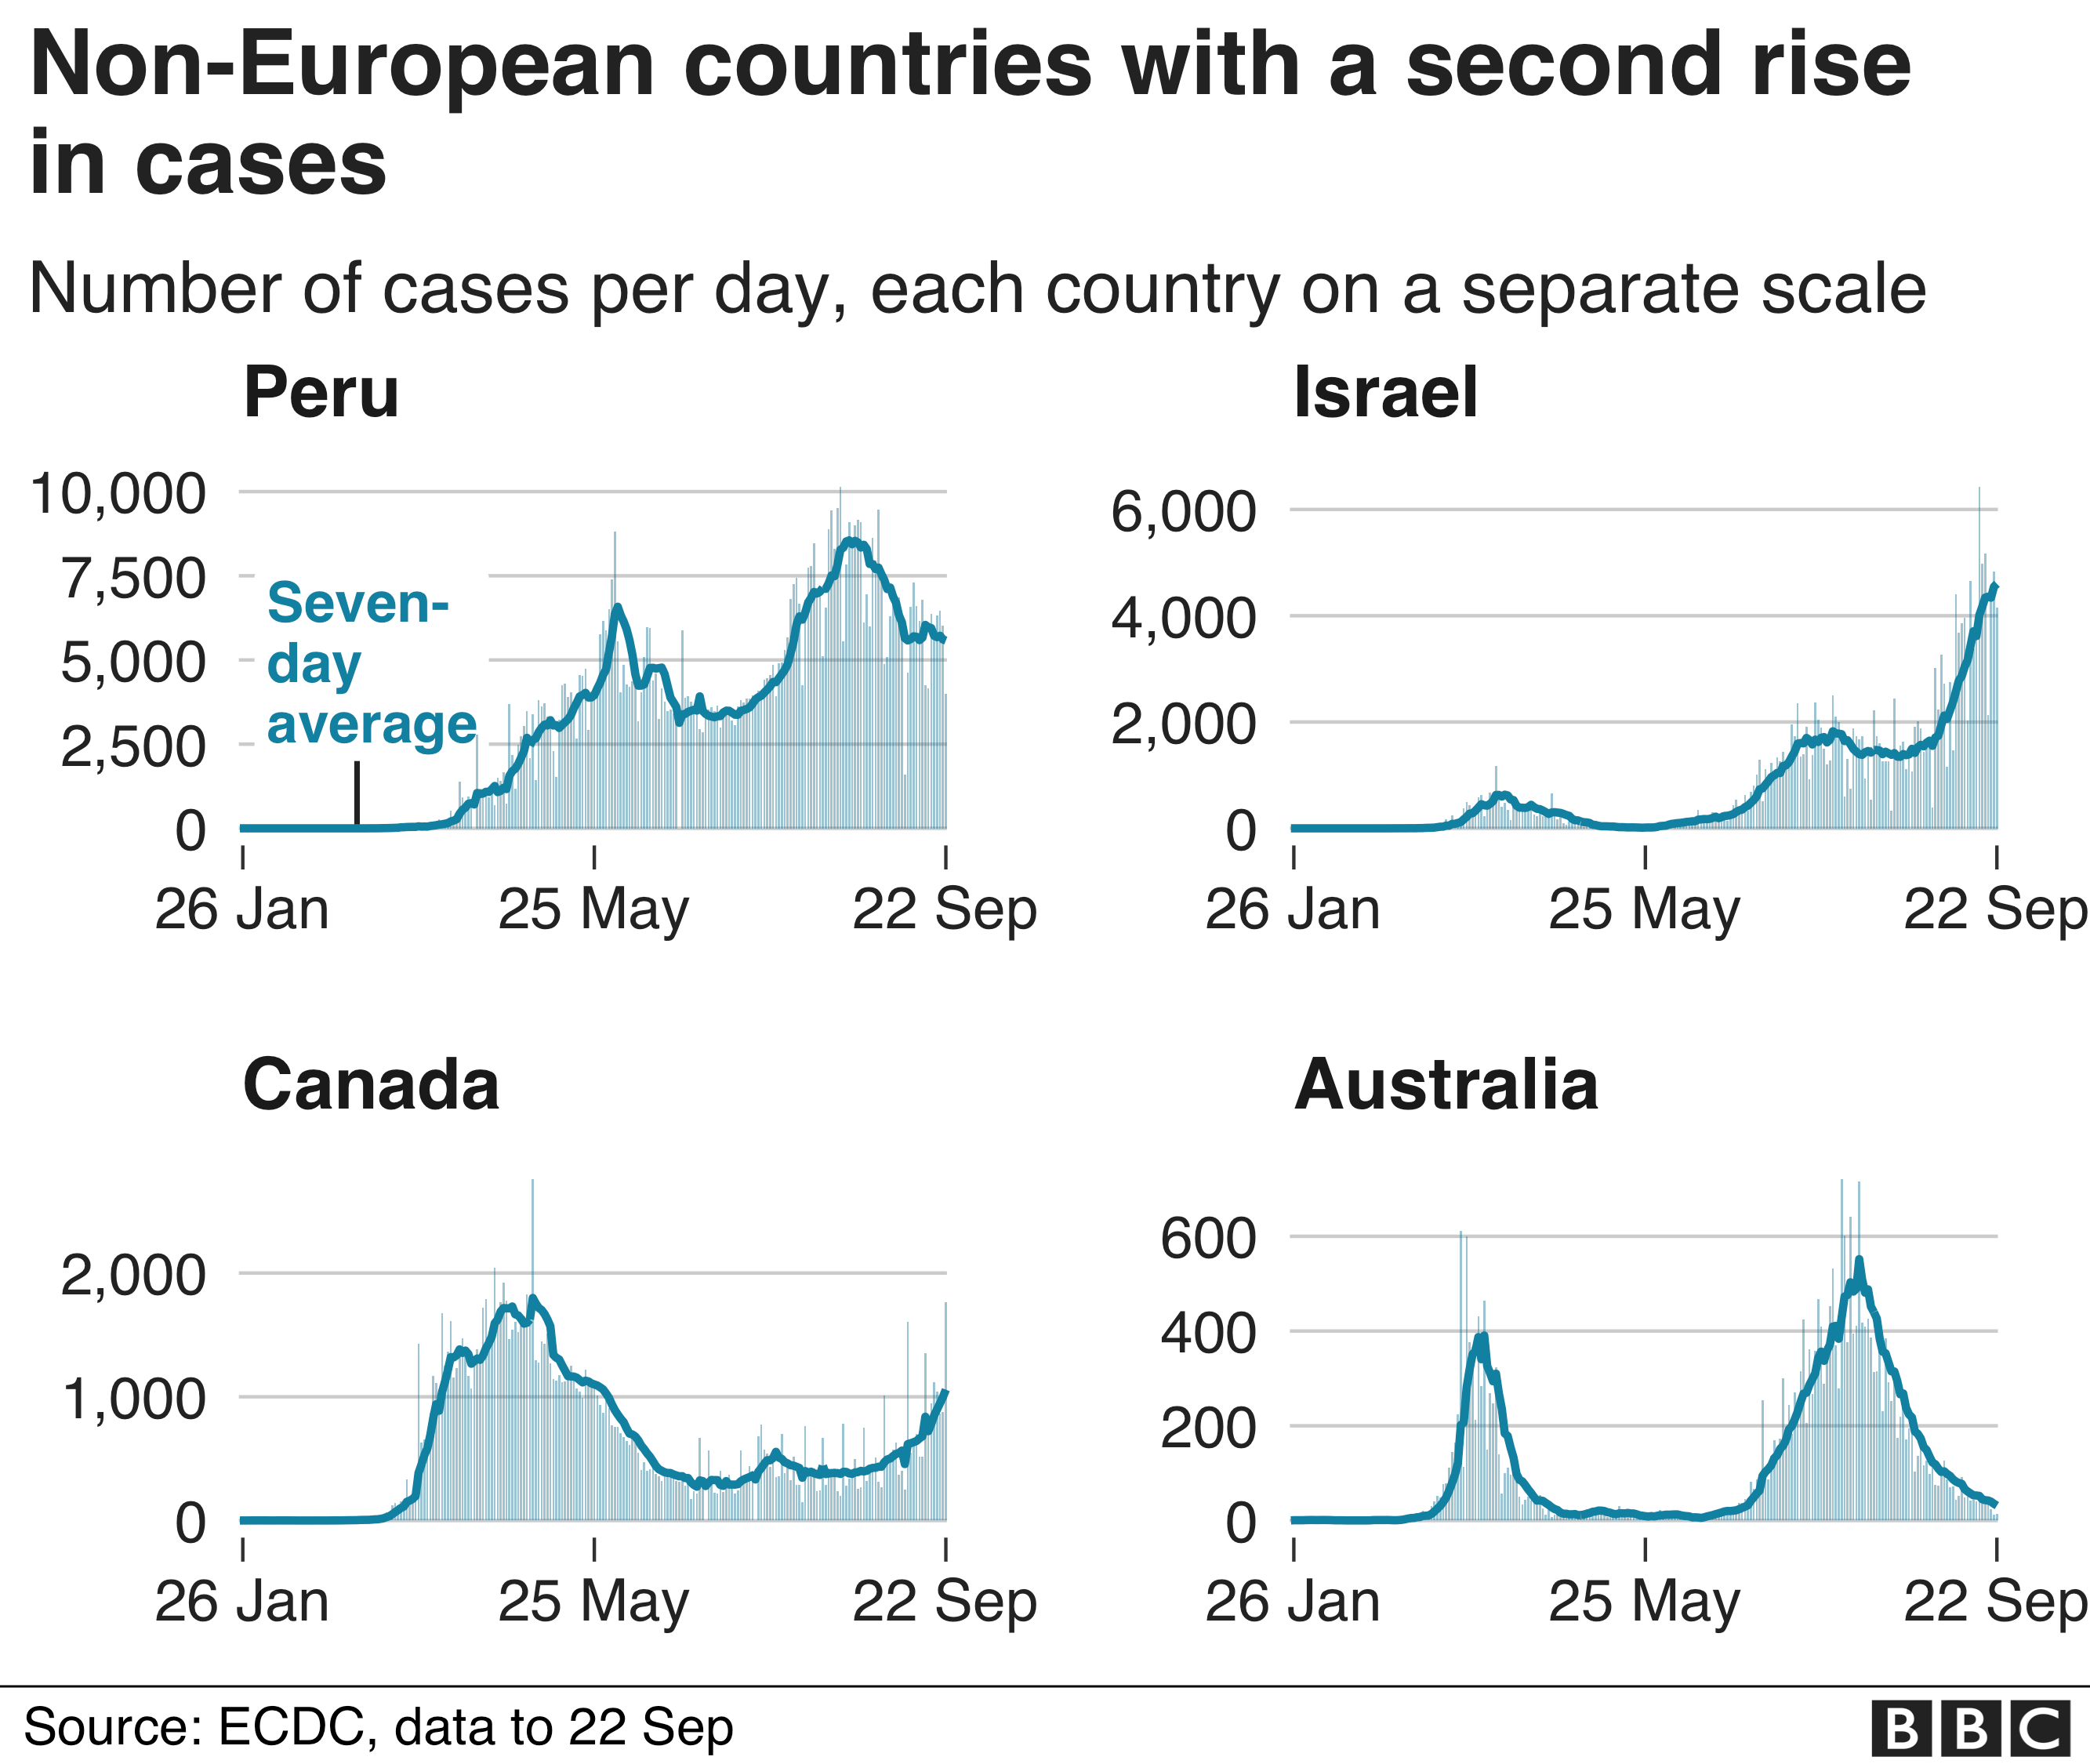 charts show non-European countries with a second rise i cases, Peru, Israel, Canada and Australia